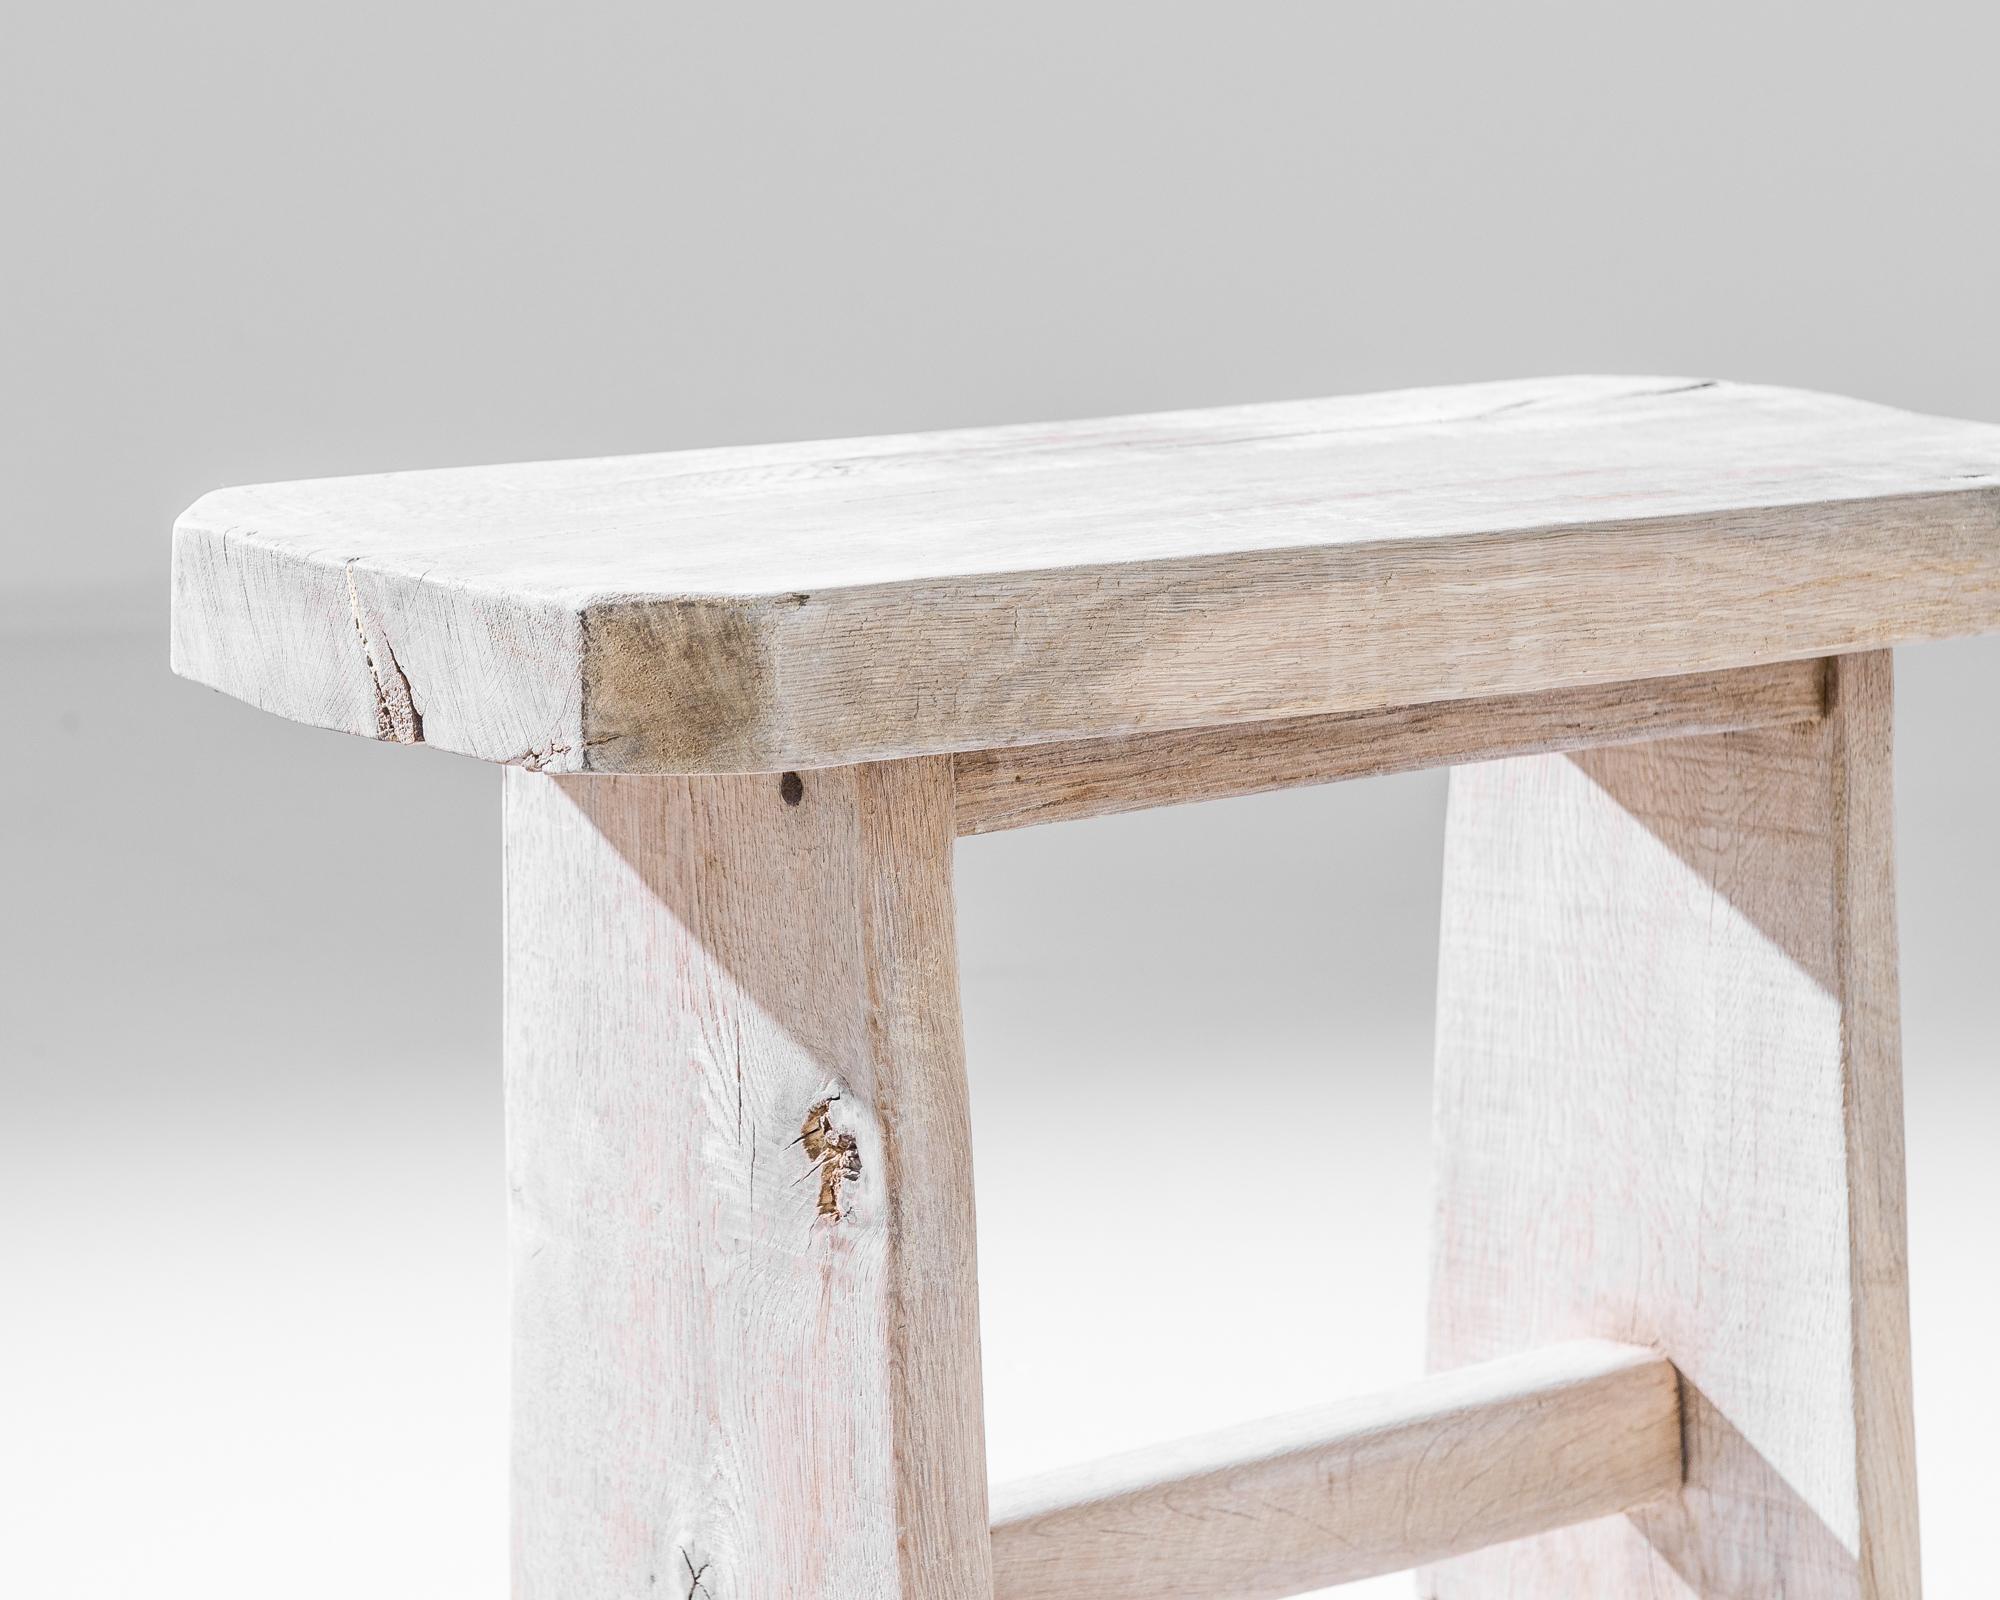 A simple oak stool from Belgium. Restored with a bleached oak finish, the light tone and natural texture recall a countryside locale.